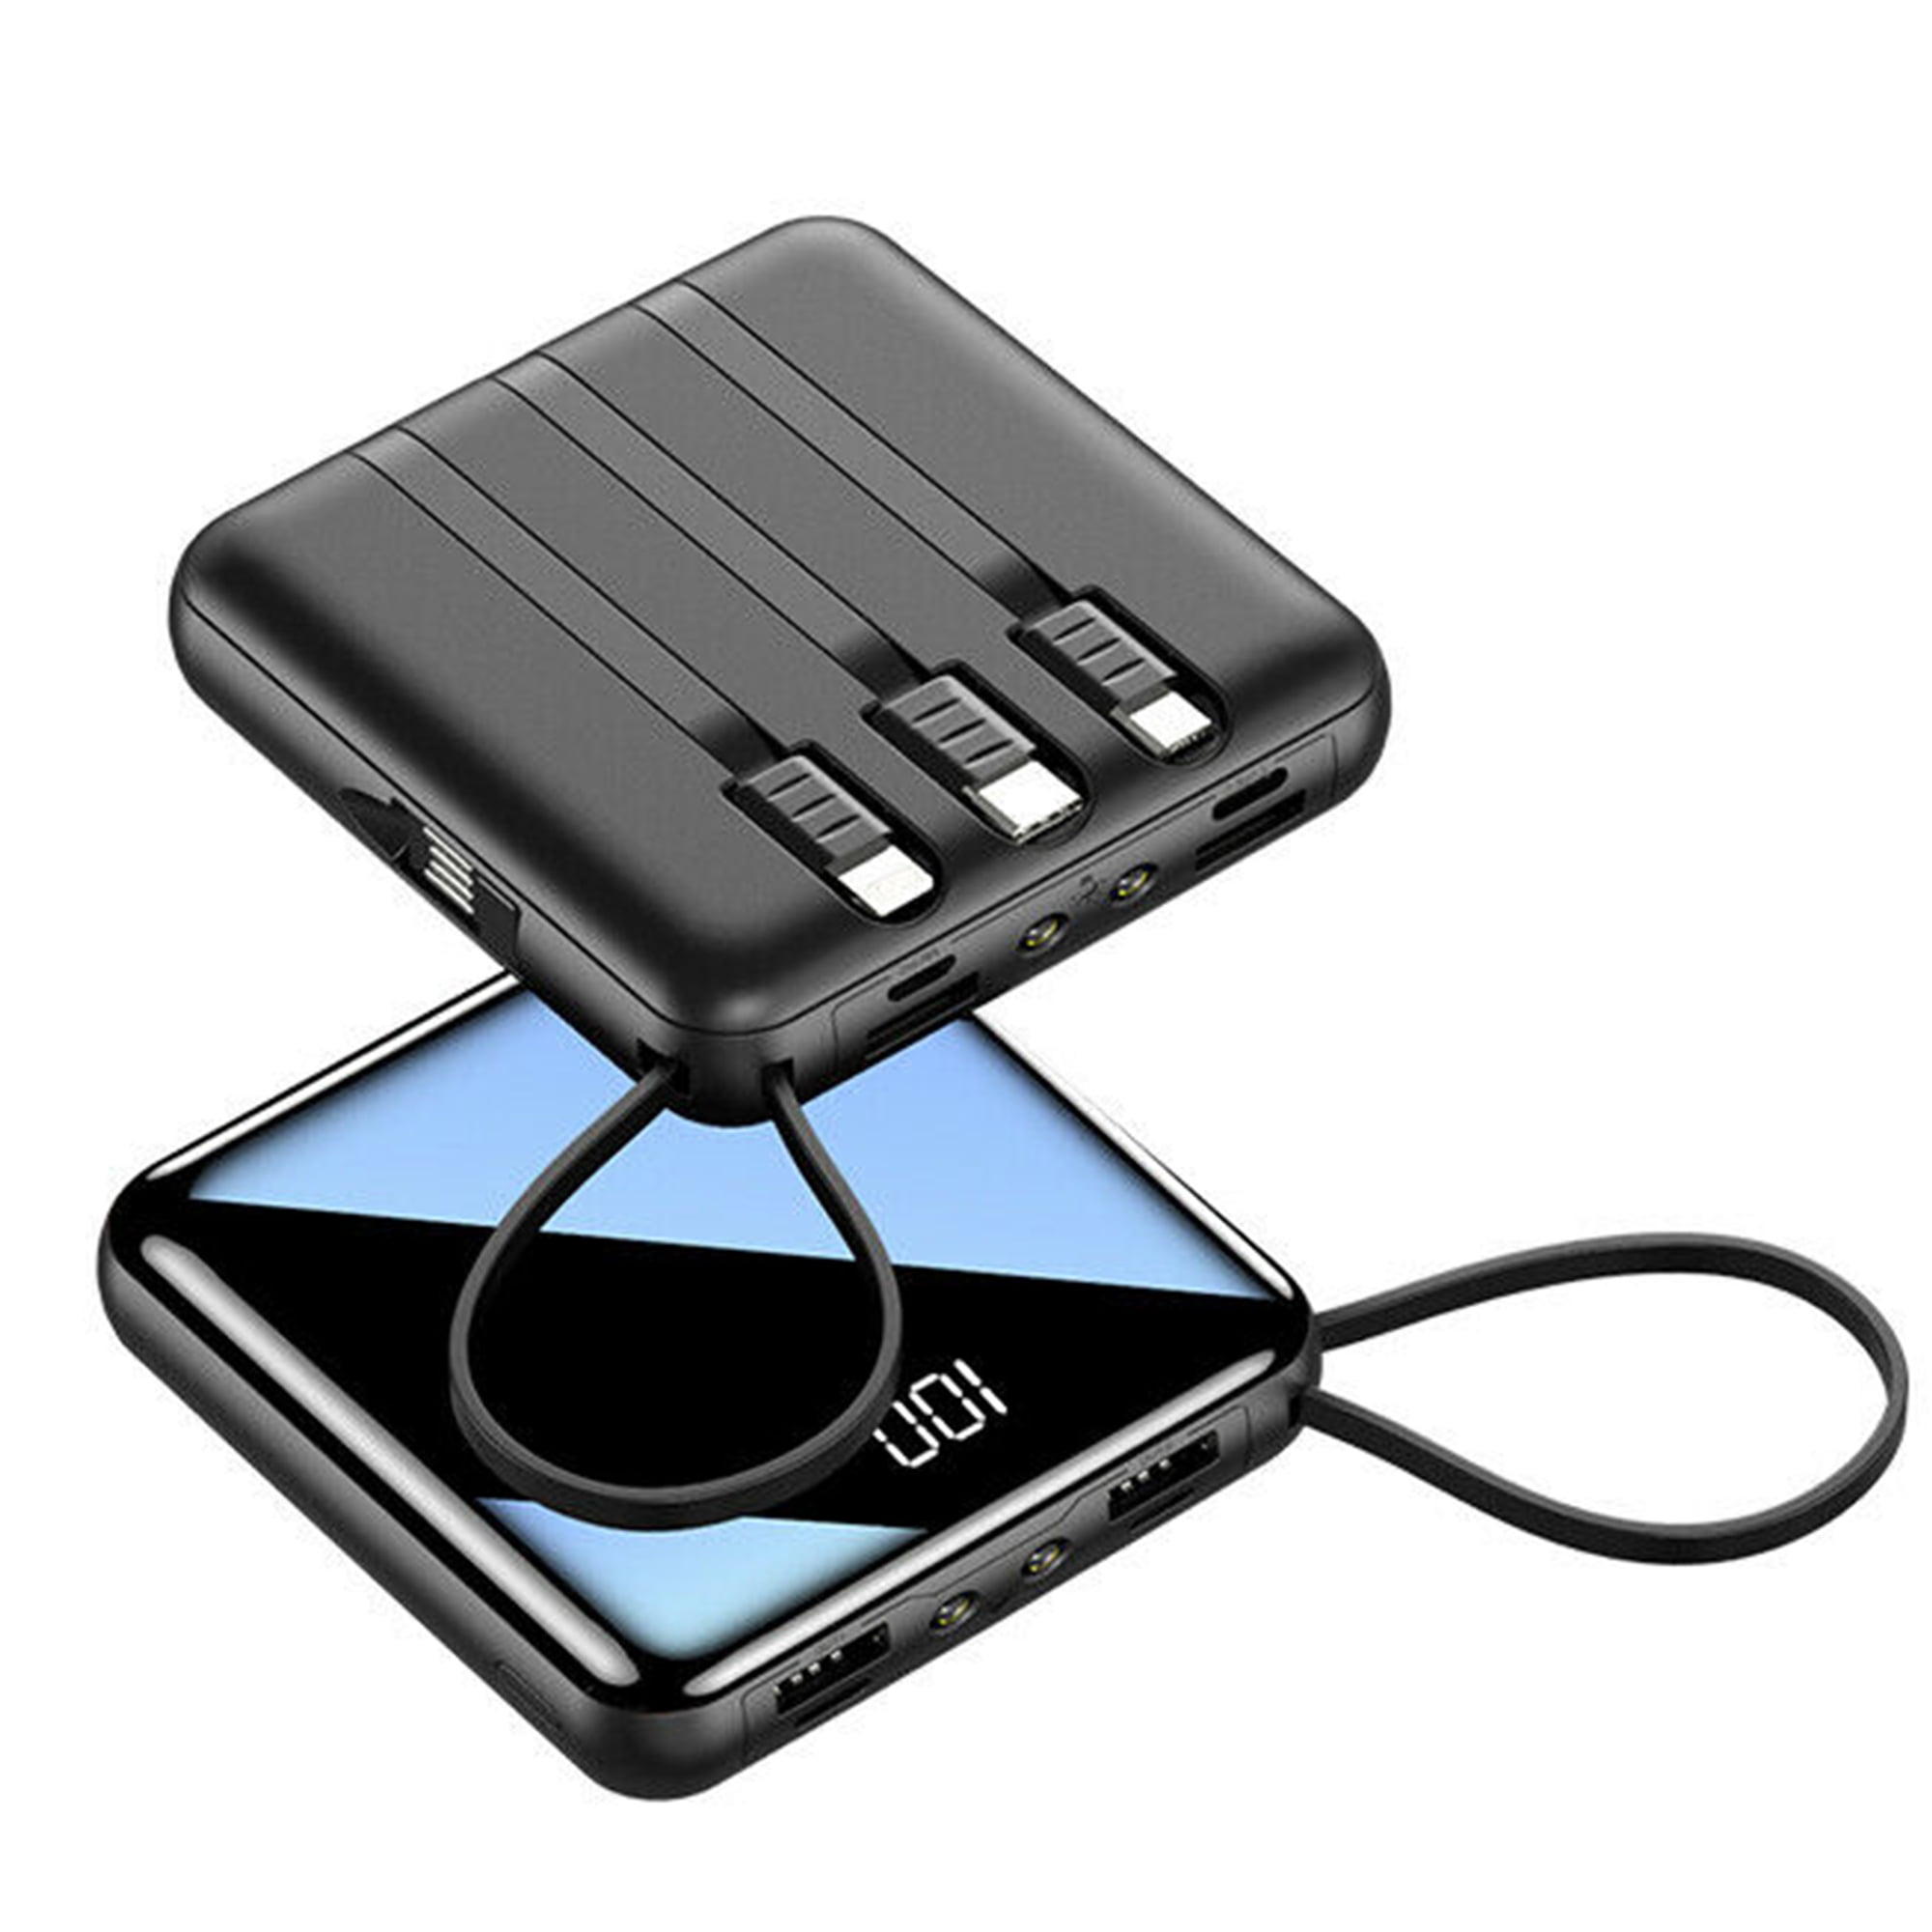 Caricabatterie USB portatile Power Bank - Libro - Sycell 